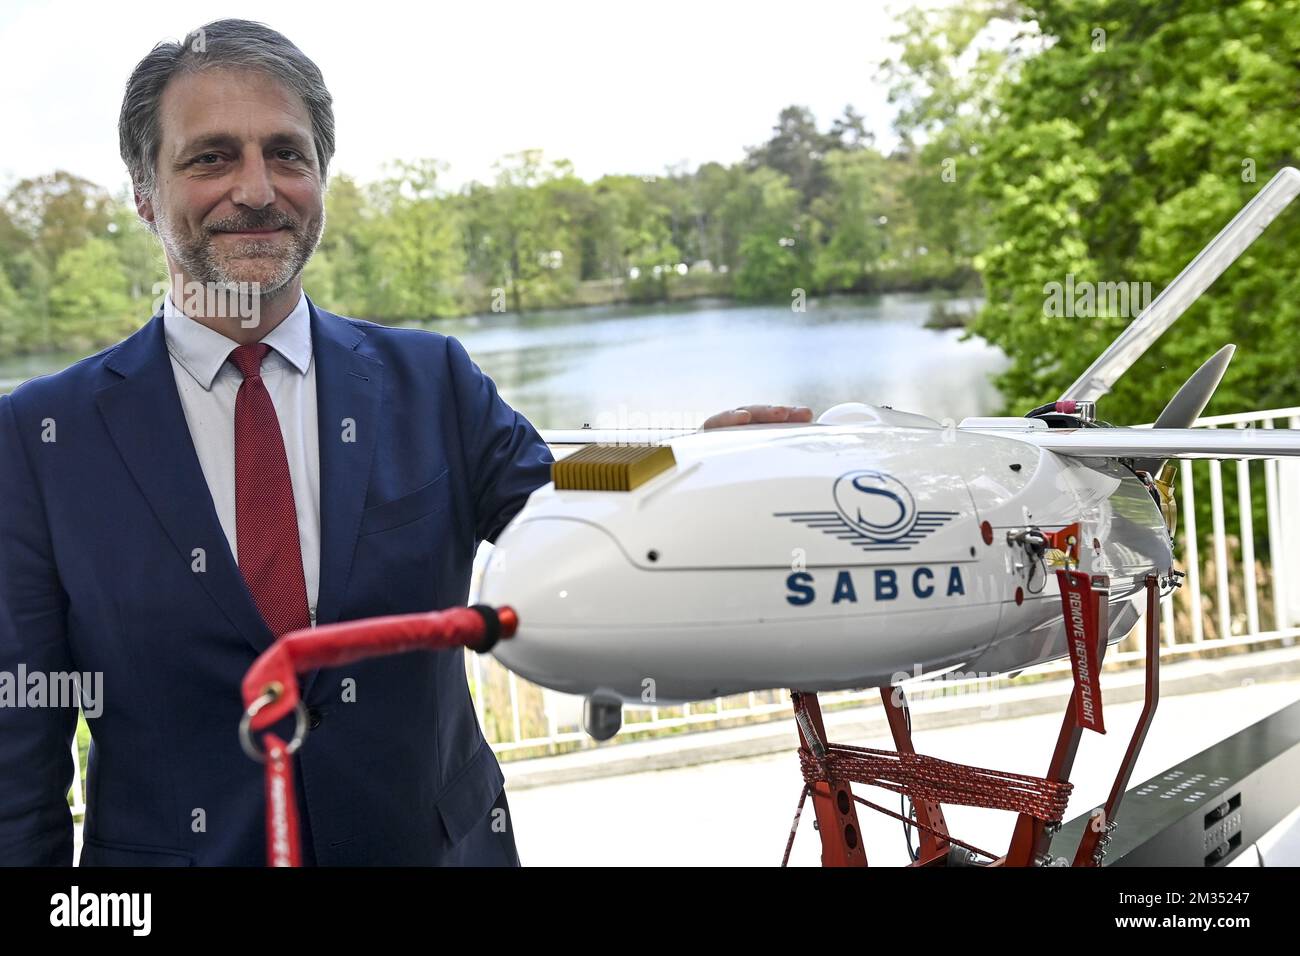 SABCA CEO Thibauld Jongen pictured during a press moment of the Belgian Nuclear Research Center (SCK CEN) and the Societe Anonyme Belge de Constructions Aeronautiques (Sabca) to present their innovative drone project, in Mol, Tuesday 18 May 2021. SCK CEN and Sabca came up with an innovative way of using drones in decommissioning projects and emergency planning. The drones map small-scale areas, such as plots and parts of installations, from the air and mark out places with increased radiation concentrations. BELGA PHOTO DIRK WAEM Stock Photo